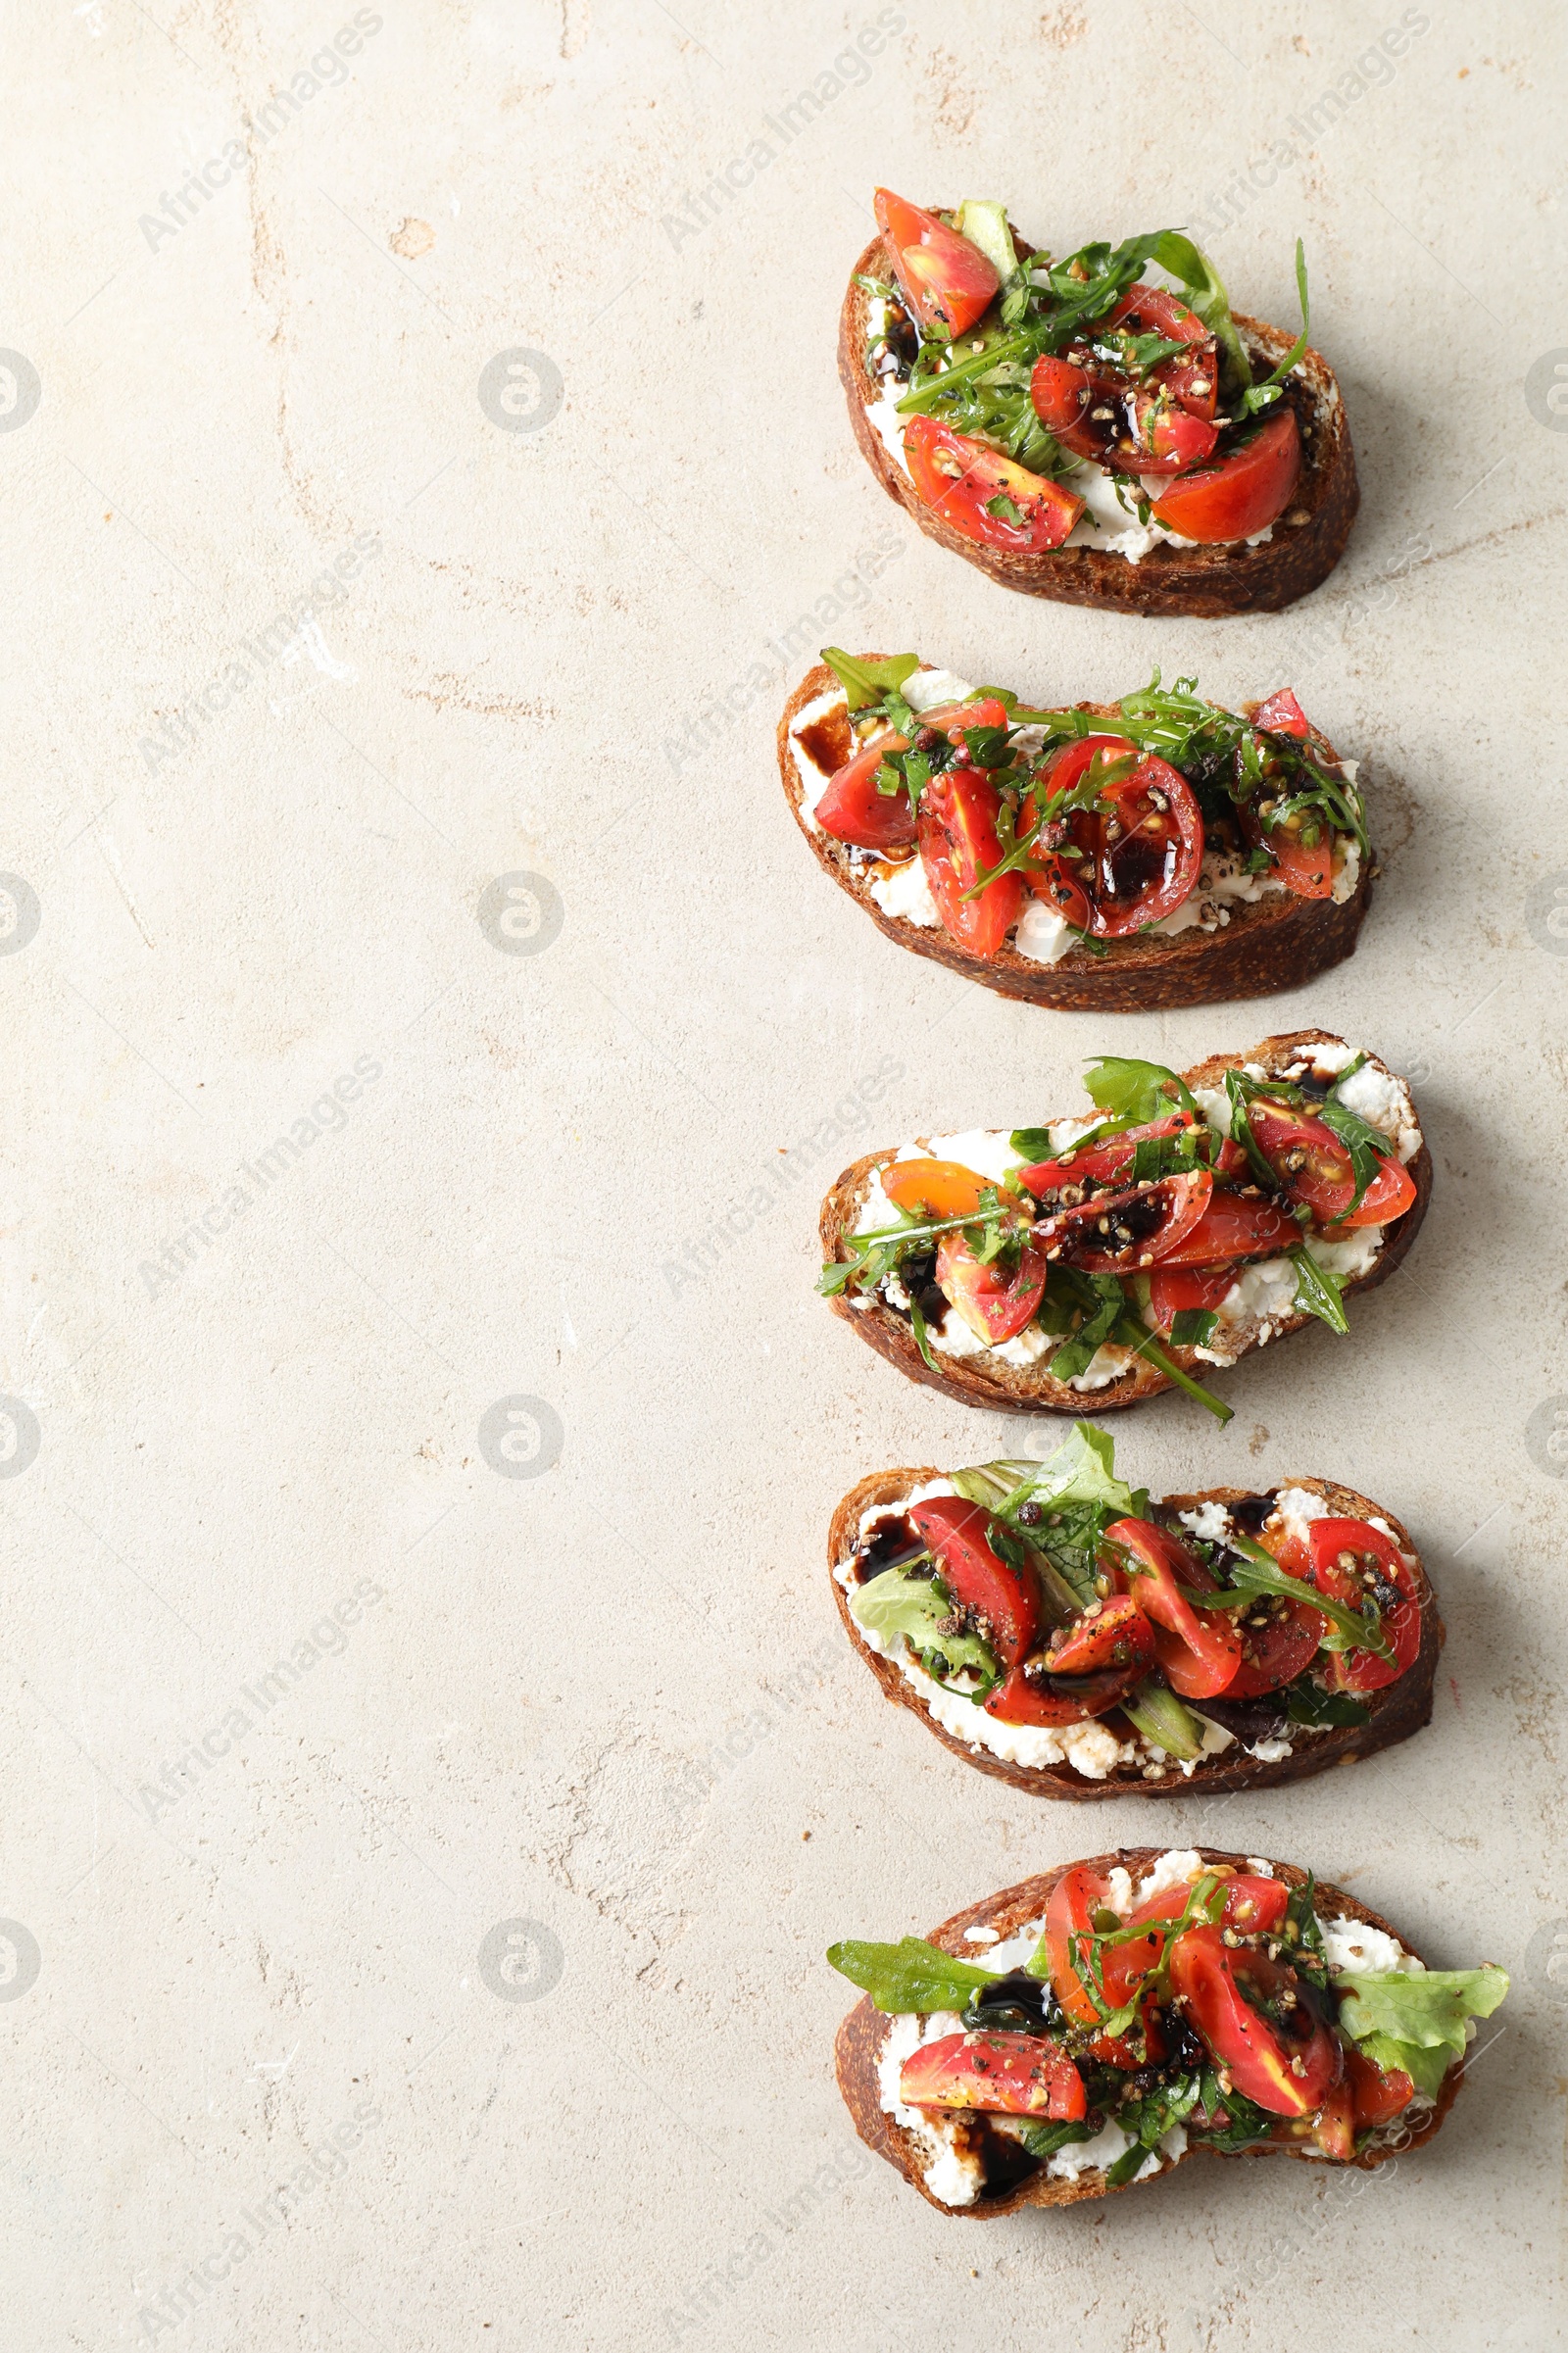 Photo of Delicious bruschettas with ricotta cheese, tomatoes and arugula on light textured table, flat lay. Space for text